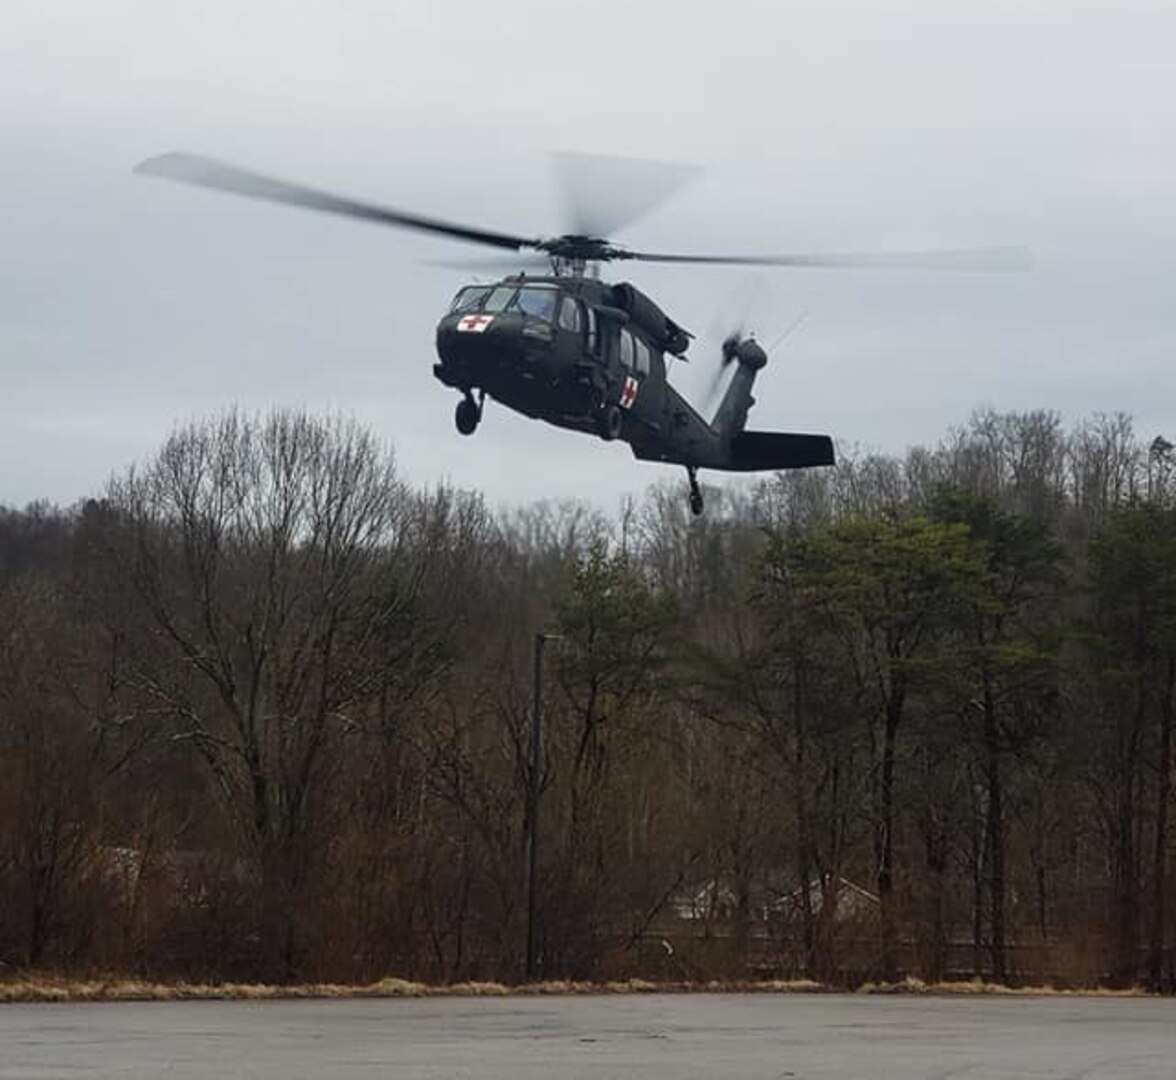 A West Virginia Army National Guard HH-60 Black Hawk assigned to Company C, 2-104th General Support Aviation Battalion (GASB), prepares to land in the parking lot of Ritchie County High School in Ellenboro, W.Va., following an aerial rescue mission of a stranded motorist Feb. 20, 2019.